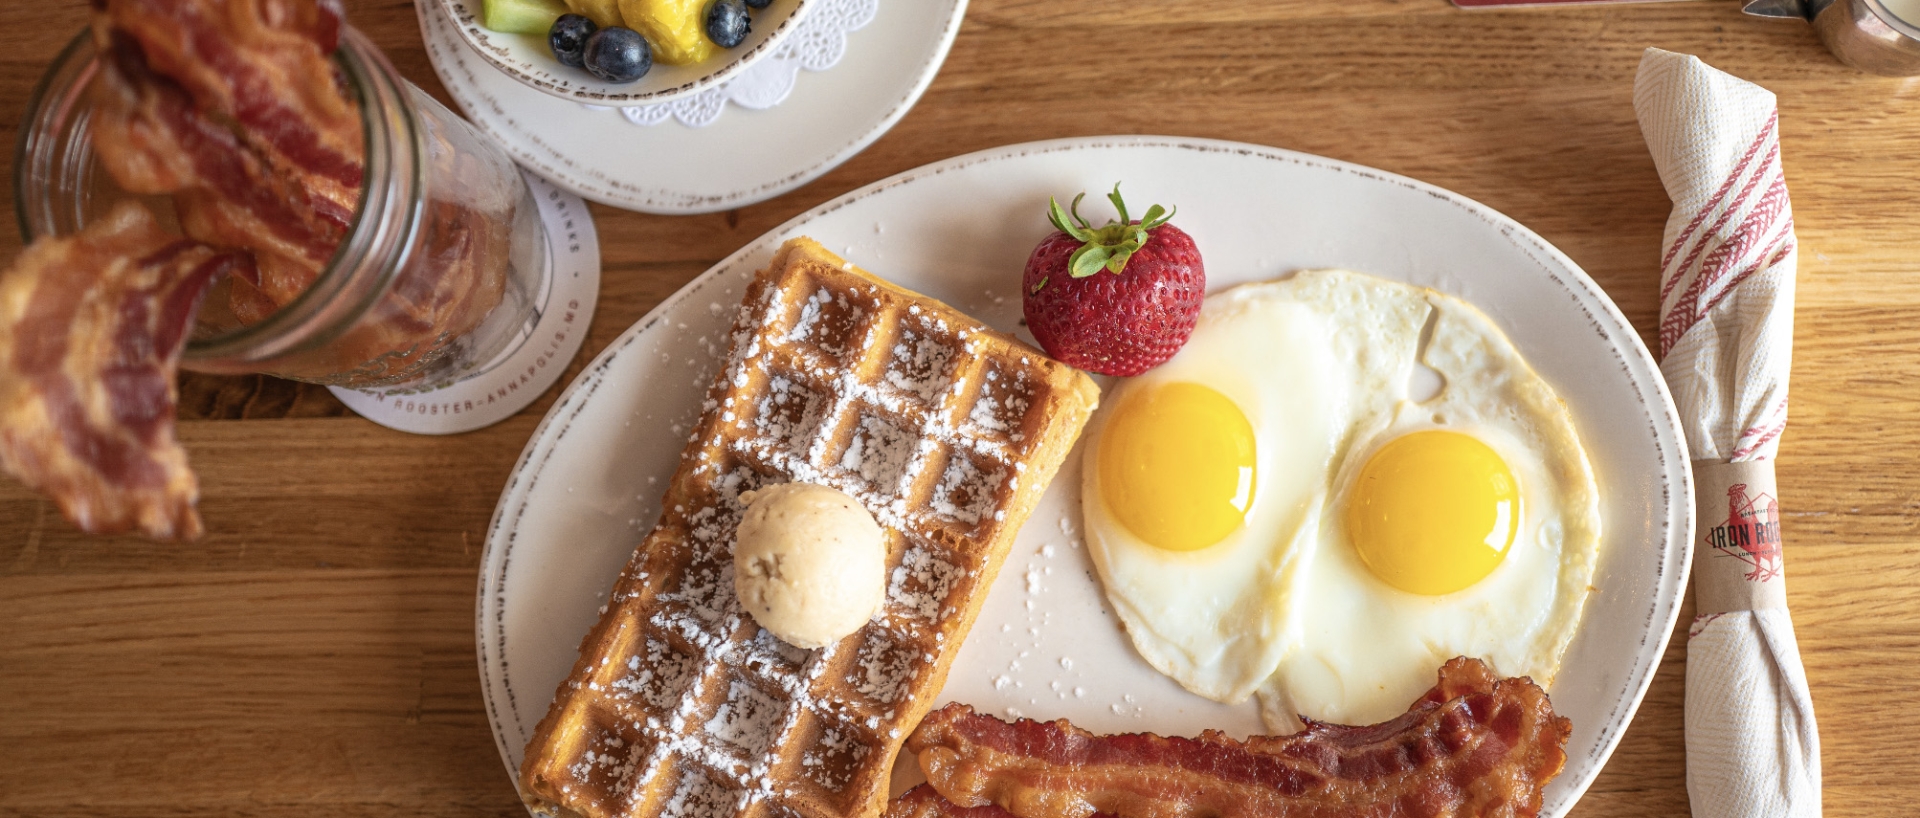 Full table breakfast at Iron Rooster including coffee, a bowl of fresh fruit, jar of Iron Rooster's famous candied bacon and a plate with Belgian waffles and two sunny side up eggs.